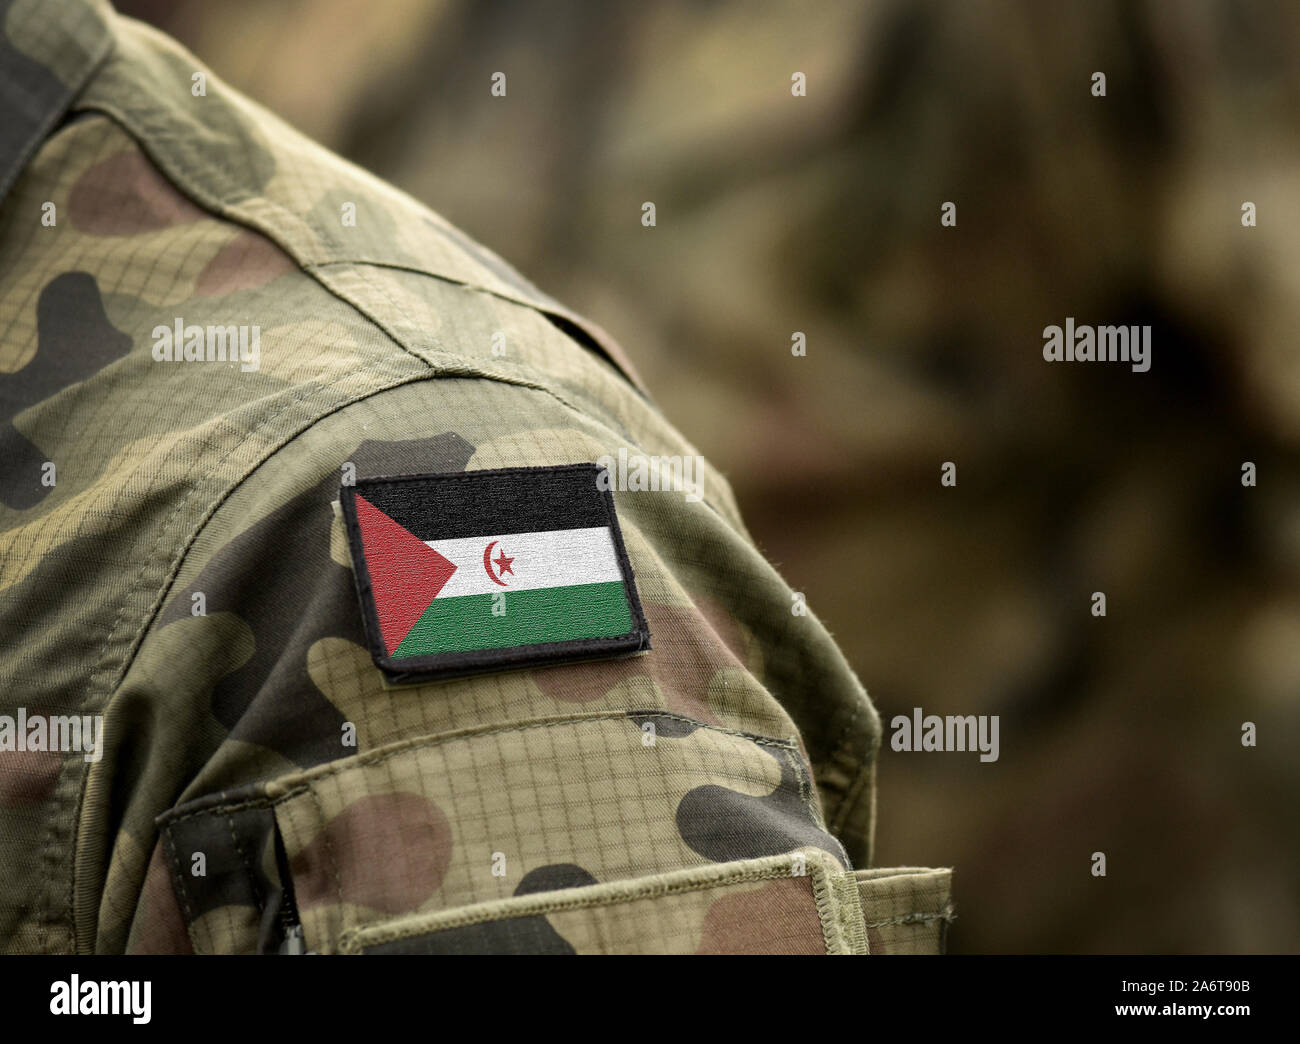 Flag of Sahrawi Arab Democratic Republic on military uniform. Army, troops, soldiers. Collage. Stock Photo